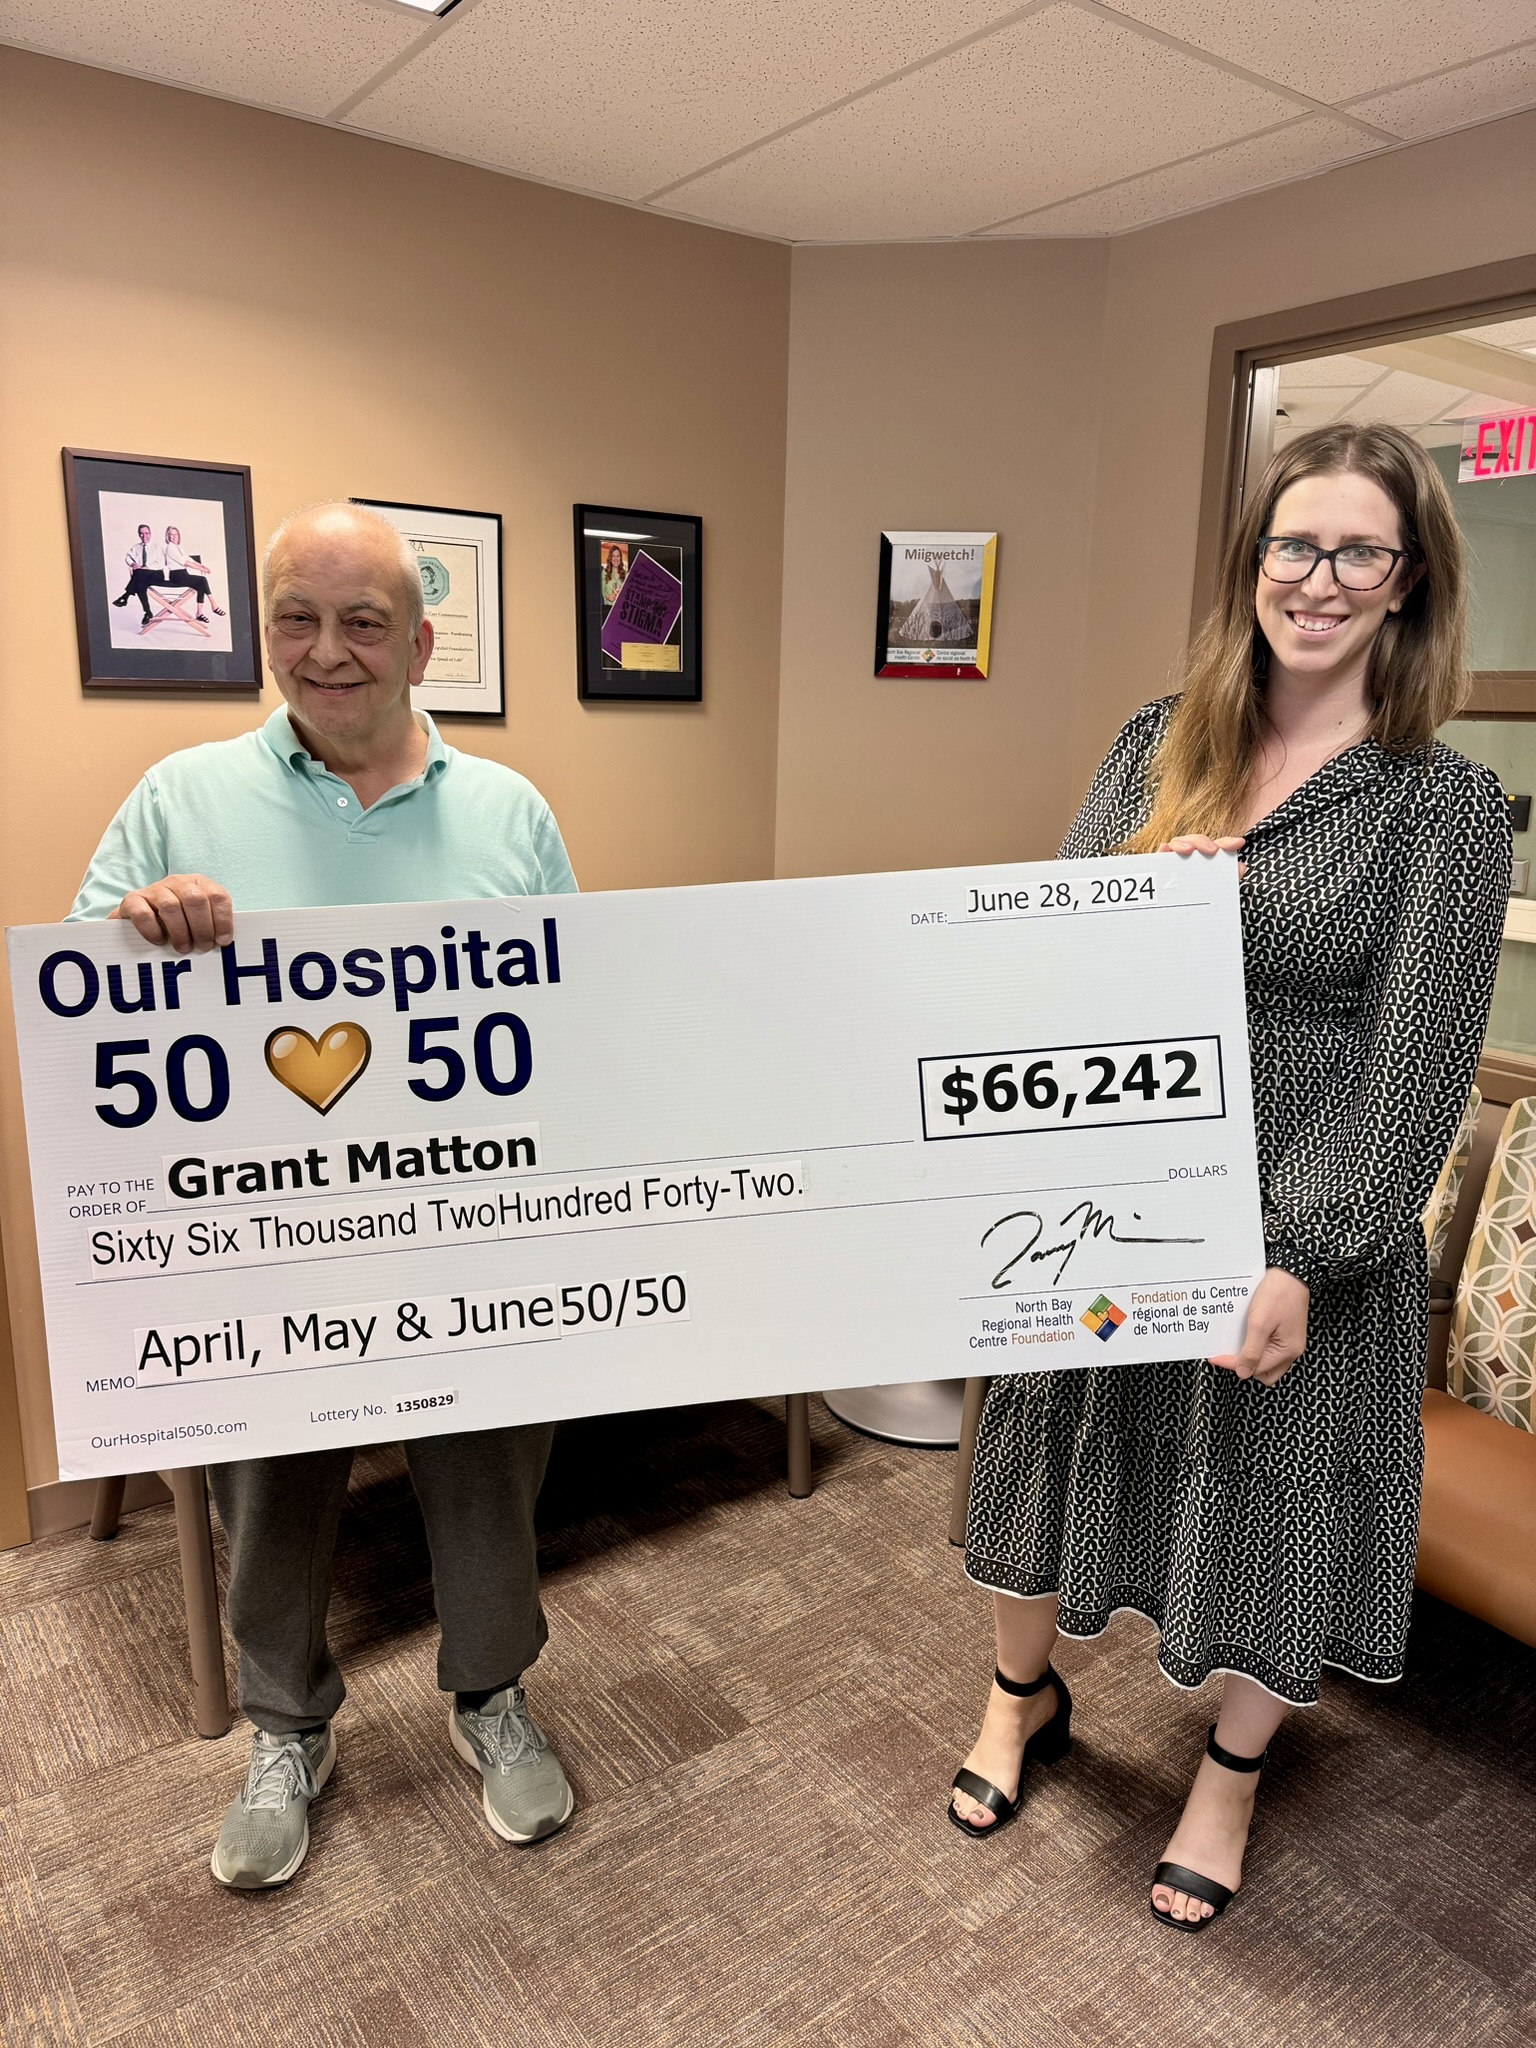 50/50 Winner Grant Matton standing with NBRHC Foundation Employee with oversized cheque. The cheque is for $66,242.